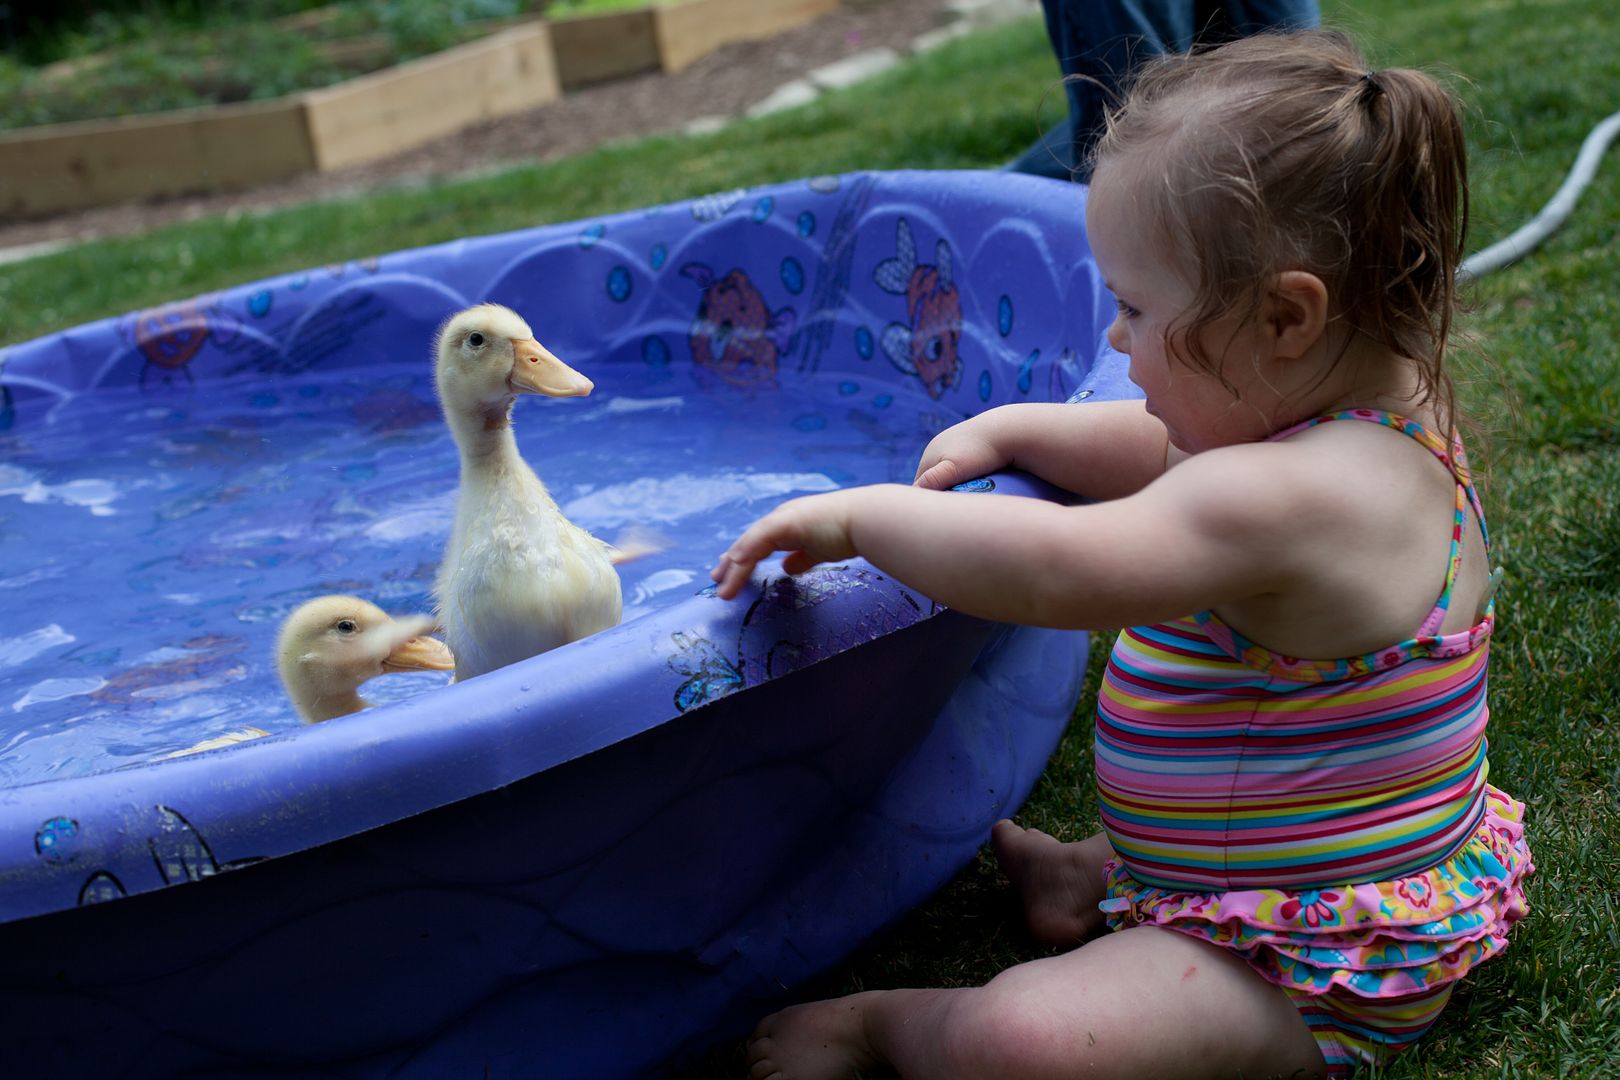 Family pets: Our new backyard Duck